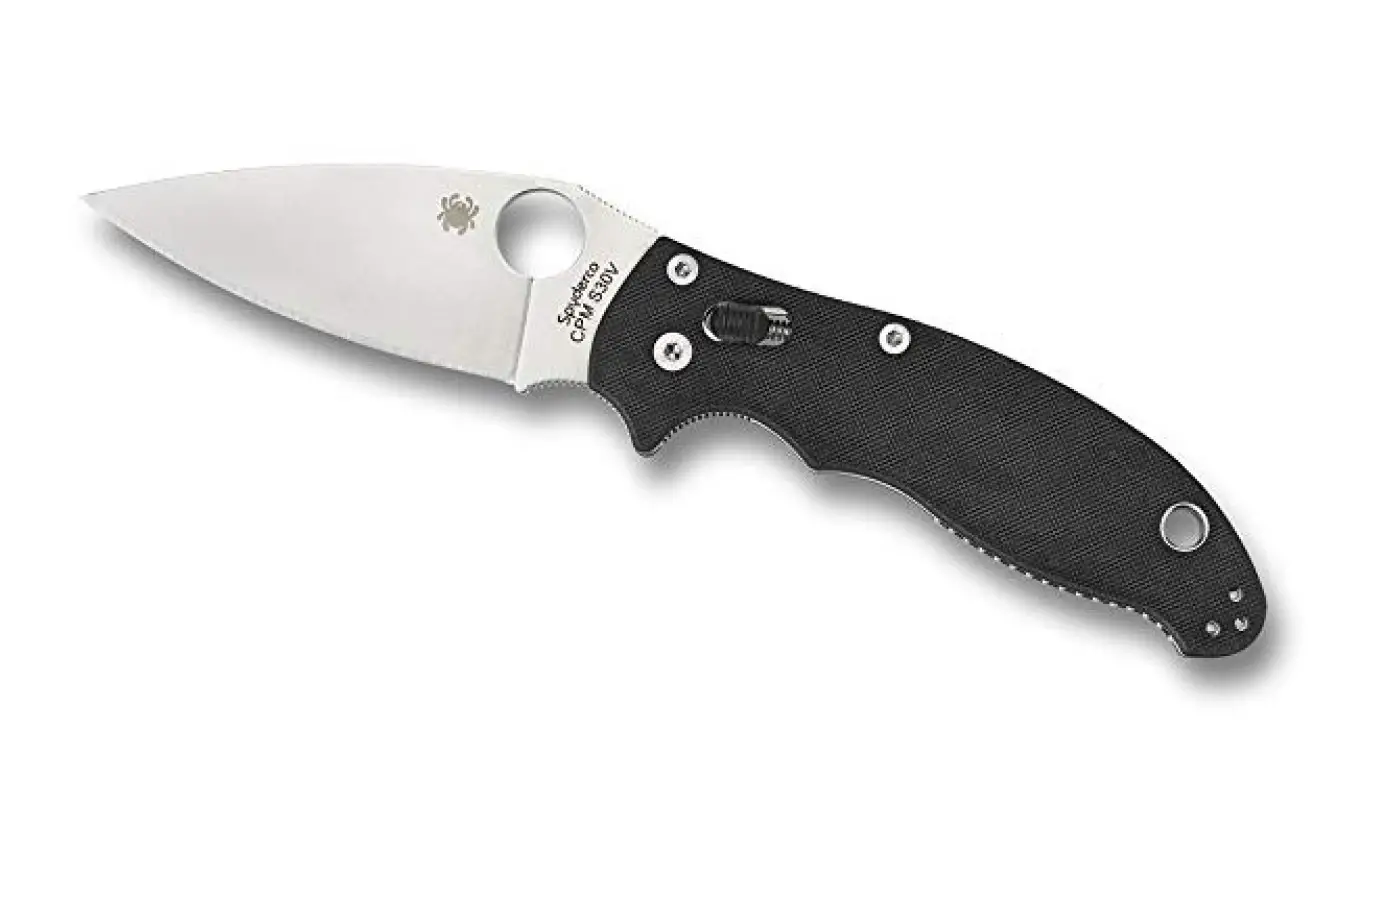 The Manix 2 offers the usual wide variety of steel options from Spyderco.